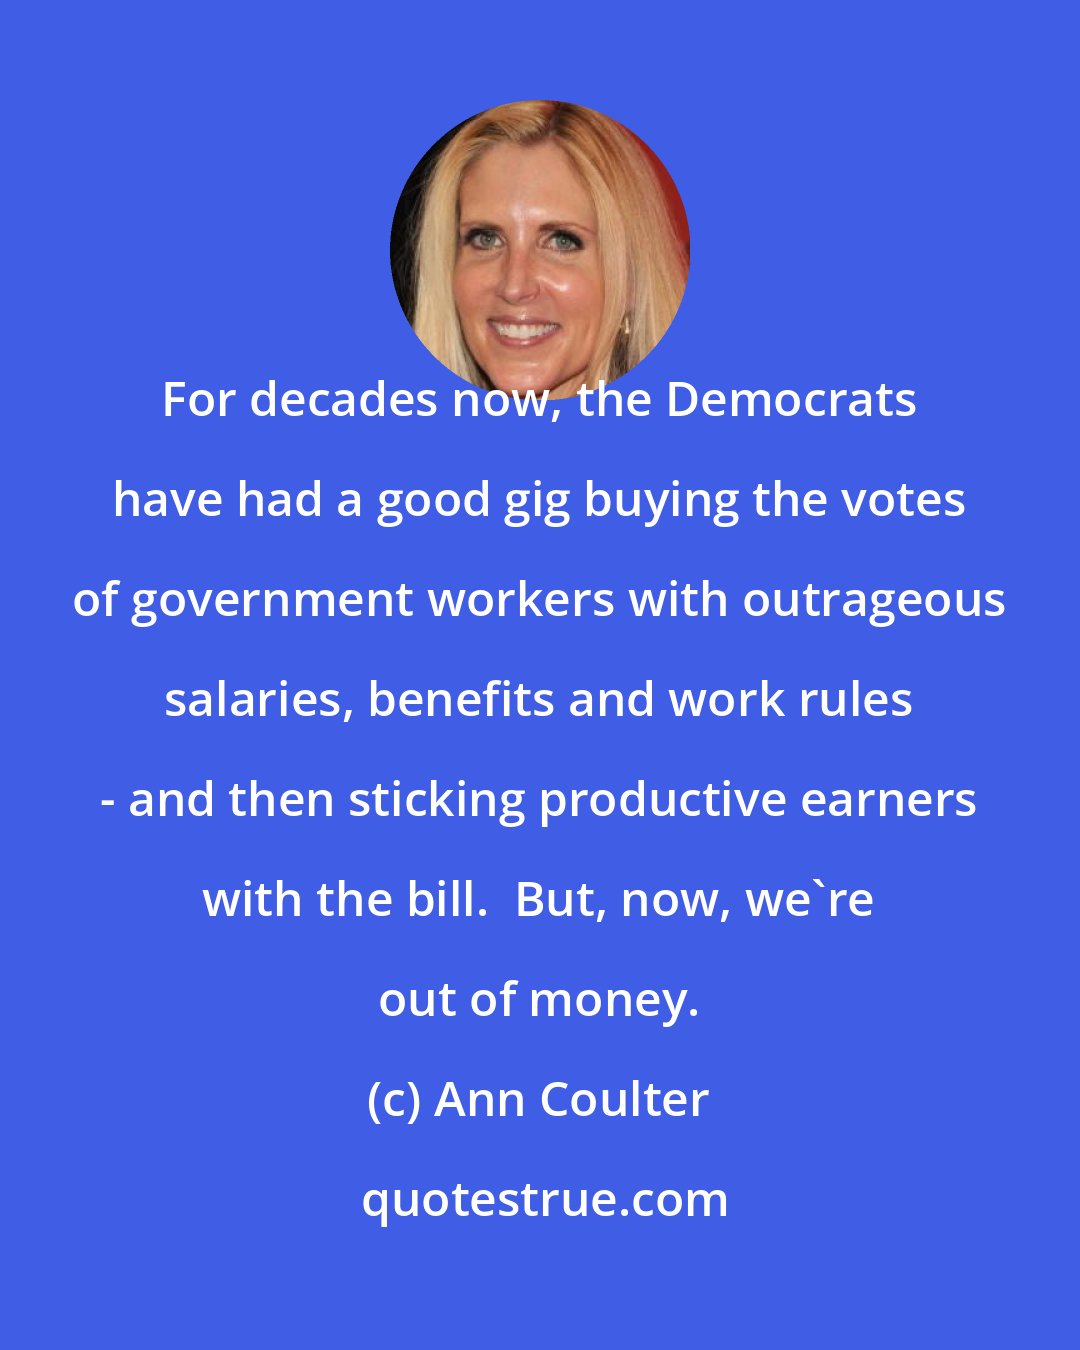 Ann Coulter: For decades now, the Democrats have had a good gig buying the votes of government workers with outrageous salaries, benefits and work rules - and then sticking productive earners with the bill.  But, now, we're out of money.